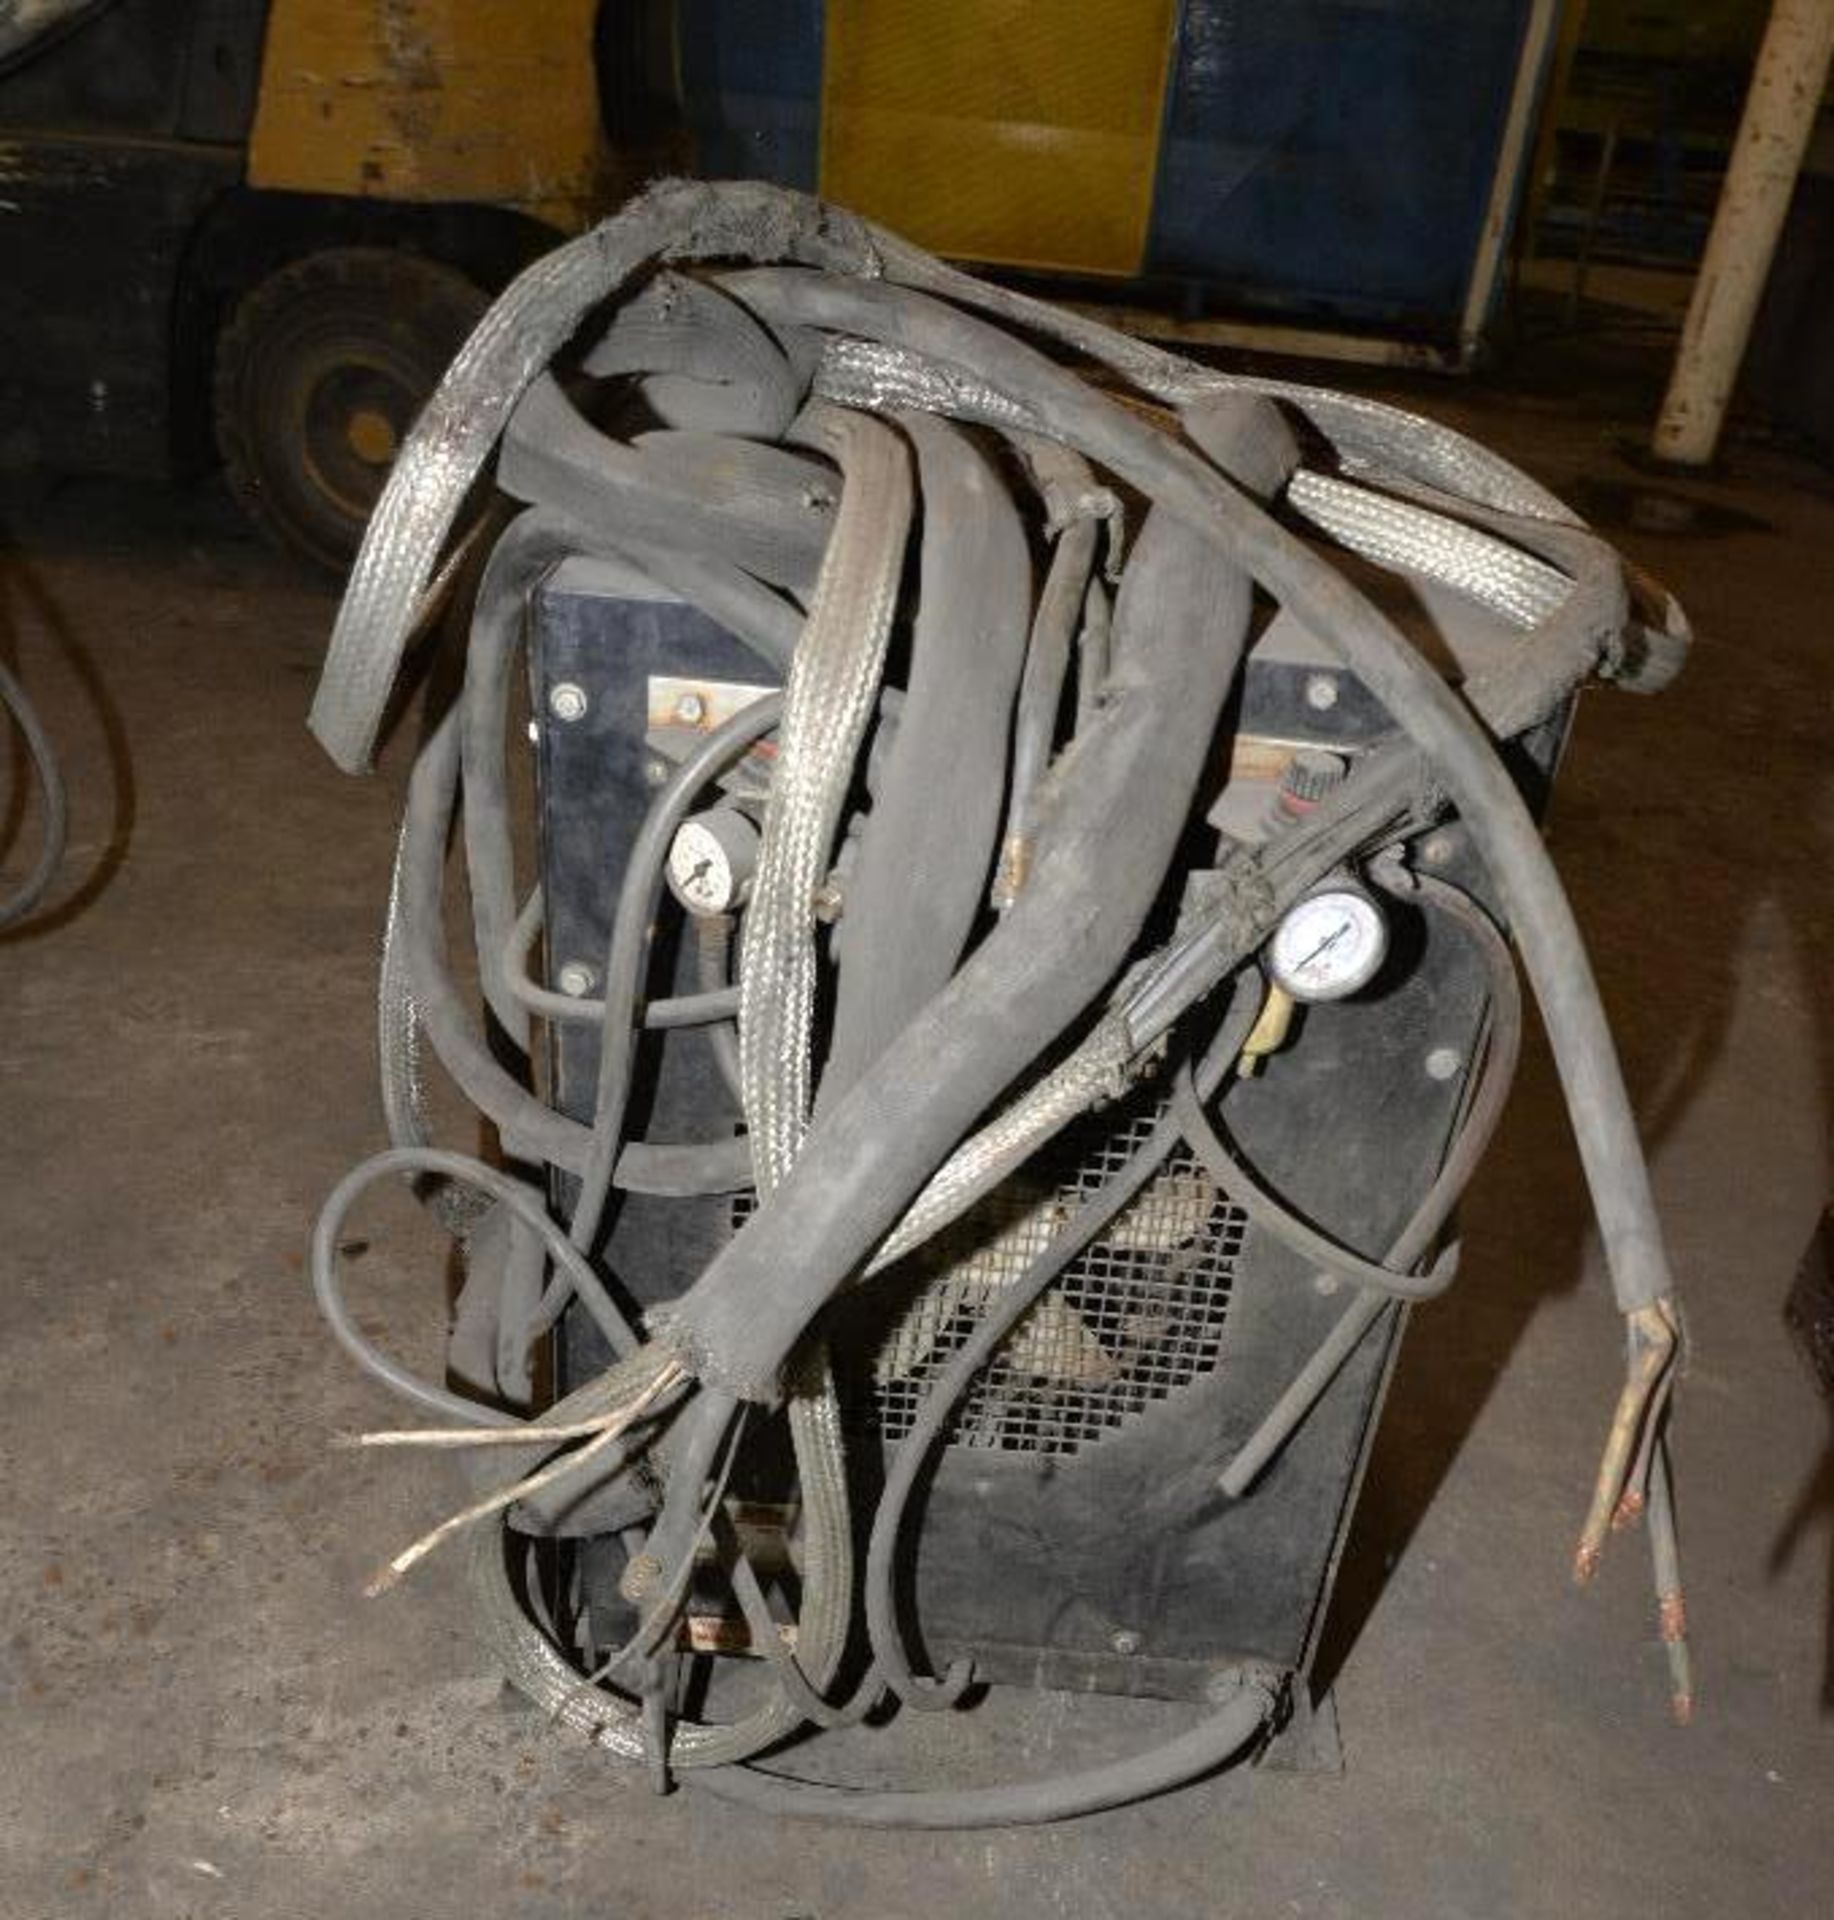 K.N. ARONSON AP-55 PLASMA CUTTING SYSTEM POWER CORD AND LEADSCONDITION UNKNOWN - Image 2 of 2